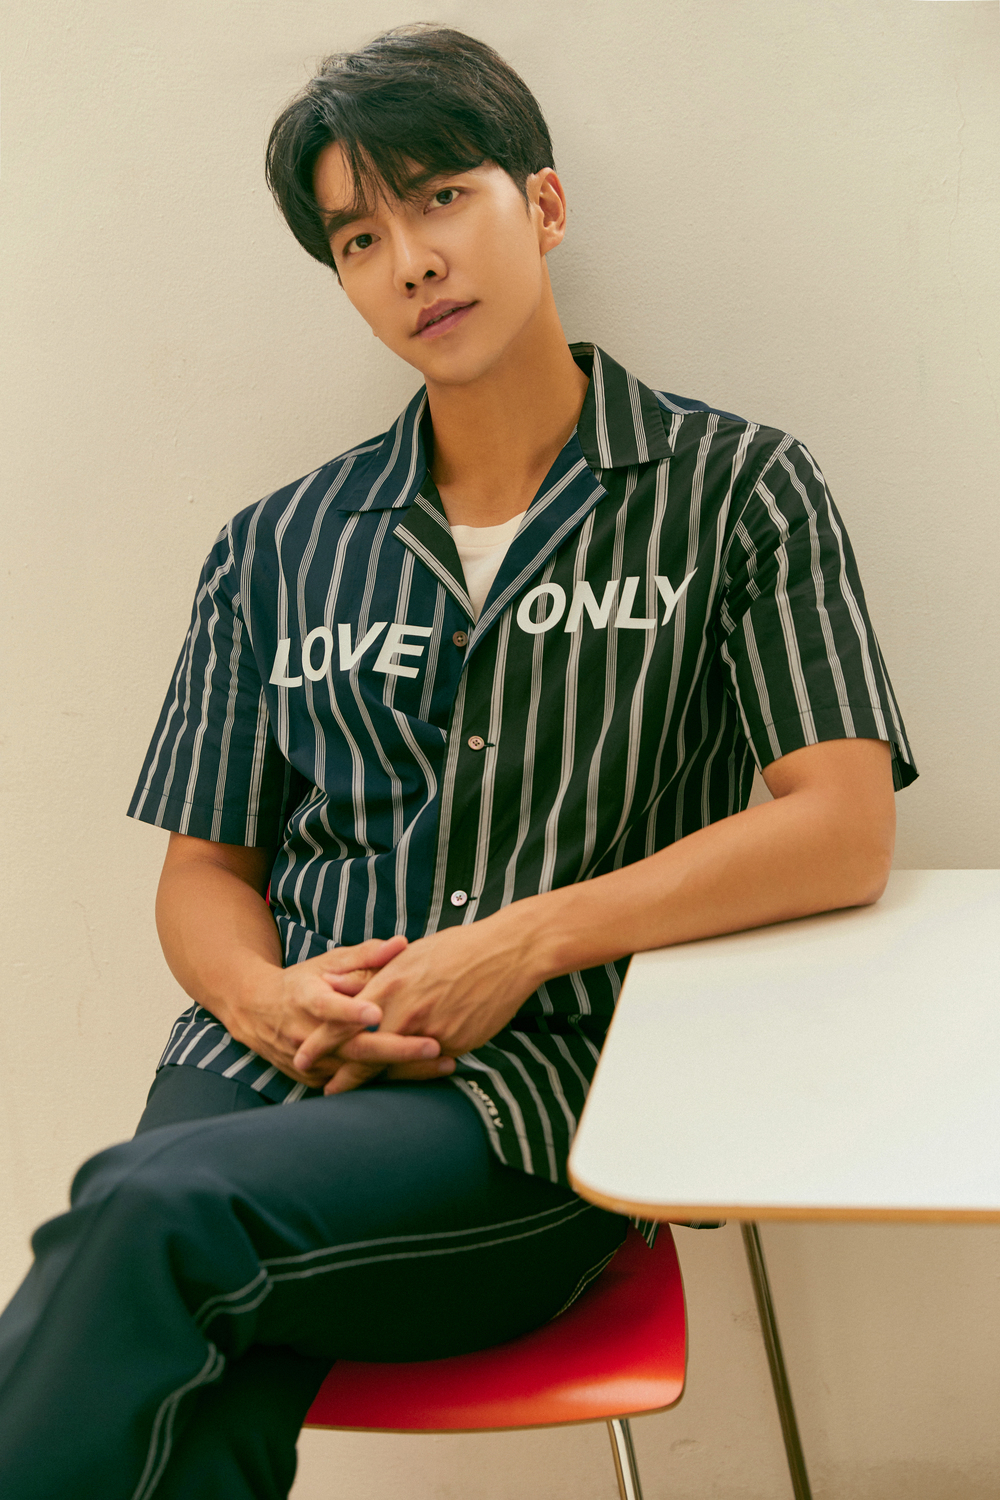 Lee Seung-gi-gi-gi-gi-gi-gi-gi-gi-gi made a special trip.Netflixs original Twogether is an eye-cleaning healing Travel variety in which two other stars from Lee Seung-gi-gi-gi-gi-gi-gi-gi-gi Gi, Ryu Ho and language and other people Travel around Asia.Lee Seung-gi-gi-gi-gi-gi-gi-gi-gi-gi talked about the weather luck that viewers were surprised in an Interview held on July 3.Lee Seung-gi-gi-gi-gi-gi-gi-gi-gi-ki and Ryu Ho Traveled twogether in Indonesia, Thailand and Nepal last September.Rising backpacking holy place Indonesia, Yuyakarta, ground paradise Bali called the Island of Angels, Thailand Bangkok, which attracts Travelers to colorful night markets, Chiang Mai, a resting place of weary heart, and a month to return to Seoul after Pokhara and Kathmandu in Nepal, the Europe closest to the sky.Lee Seung-gi-gi-gi-gi-gi-gi-gi-gi-ki is known to be good enough to avoid natural disasters and wars.In fact, at the time of the spread of Corona 19 in Korea, many people wondered where Lee Seung-gi-gi-gi-gi-gi-gi-gi-gi Gi was, and Lee Seung-gi-gi-gi-gi-gi-gi-gi-gi Gi was relieved to know that he was in Korea through SNS.In the meantime, Twogether reveals the true value of Weather Fairy Lee Seung-gi-gi-gi-gi-gi-gi-gi-gi Gi.In particular, Lee Seung-gi-gi-gi-gi-gi-gi-gi-gi-ki, who performs his mission in the changing weather of Nepal, gathered topics among Twogether viewers.Lee said, It was so amazing. The original residents, those who have lived for generations, said, 100%, 1000% I can never see today. I can not see it.I thought the energy about the weather was still alive. In addition, they had to succeed in various missions to get clues to where they had fans, and they had to perform tight Travel schedules and difficult missions.Lee Seung-gi-gi-gi-gi-gi-gi-gi-gi-gi said, The mission was almost difficult. There was no comfortable mission. The 15m diving mission was not going to see the fan if I could not run.I had a Feelings like that. I also got a paragliding and Lee Ho painted on the beach, which was higher than I thought.I have less than 20% chance of getting hit, but I want to know if I can not get it right, so now I think of the two most. Lee Seung-gi-gi-gi-gi-gi-gi-gi-gi-gi, who had to perform a tight schedule and a spectacular mission, said, If it was not for the moving part or the other Europe to come and go quickly, it was a lie, but it seemed to be fun because it felt like Traveling.Especially, Lee Ho seems to have received energy from such a part. I think we could shoot happily even in busy schedule. 